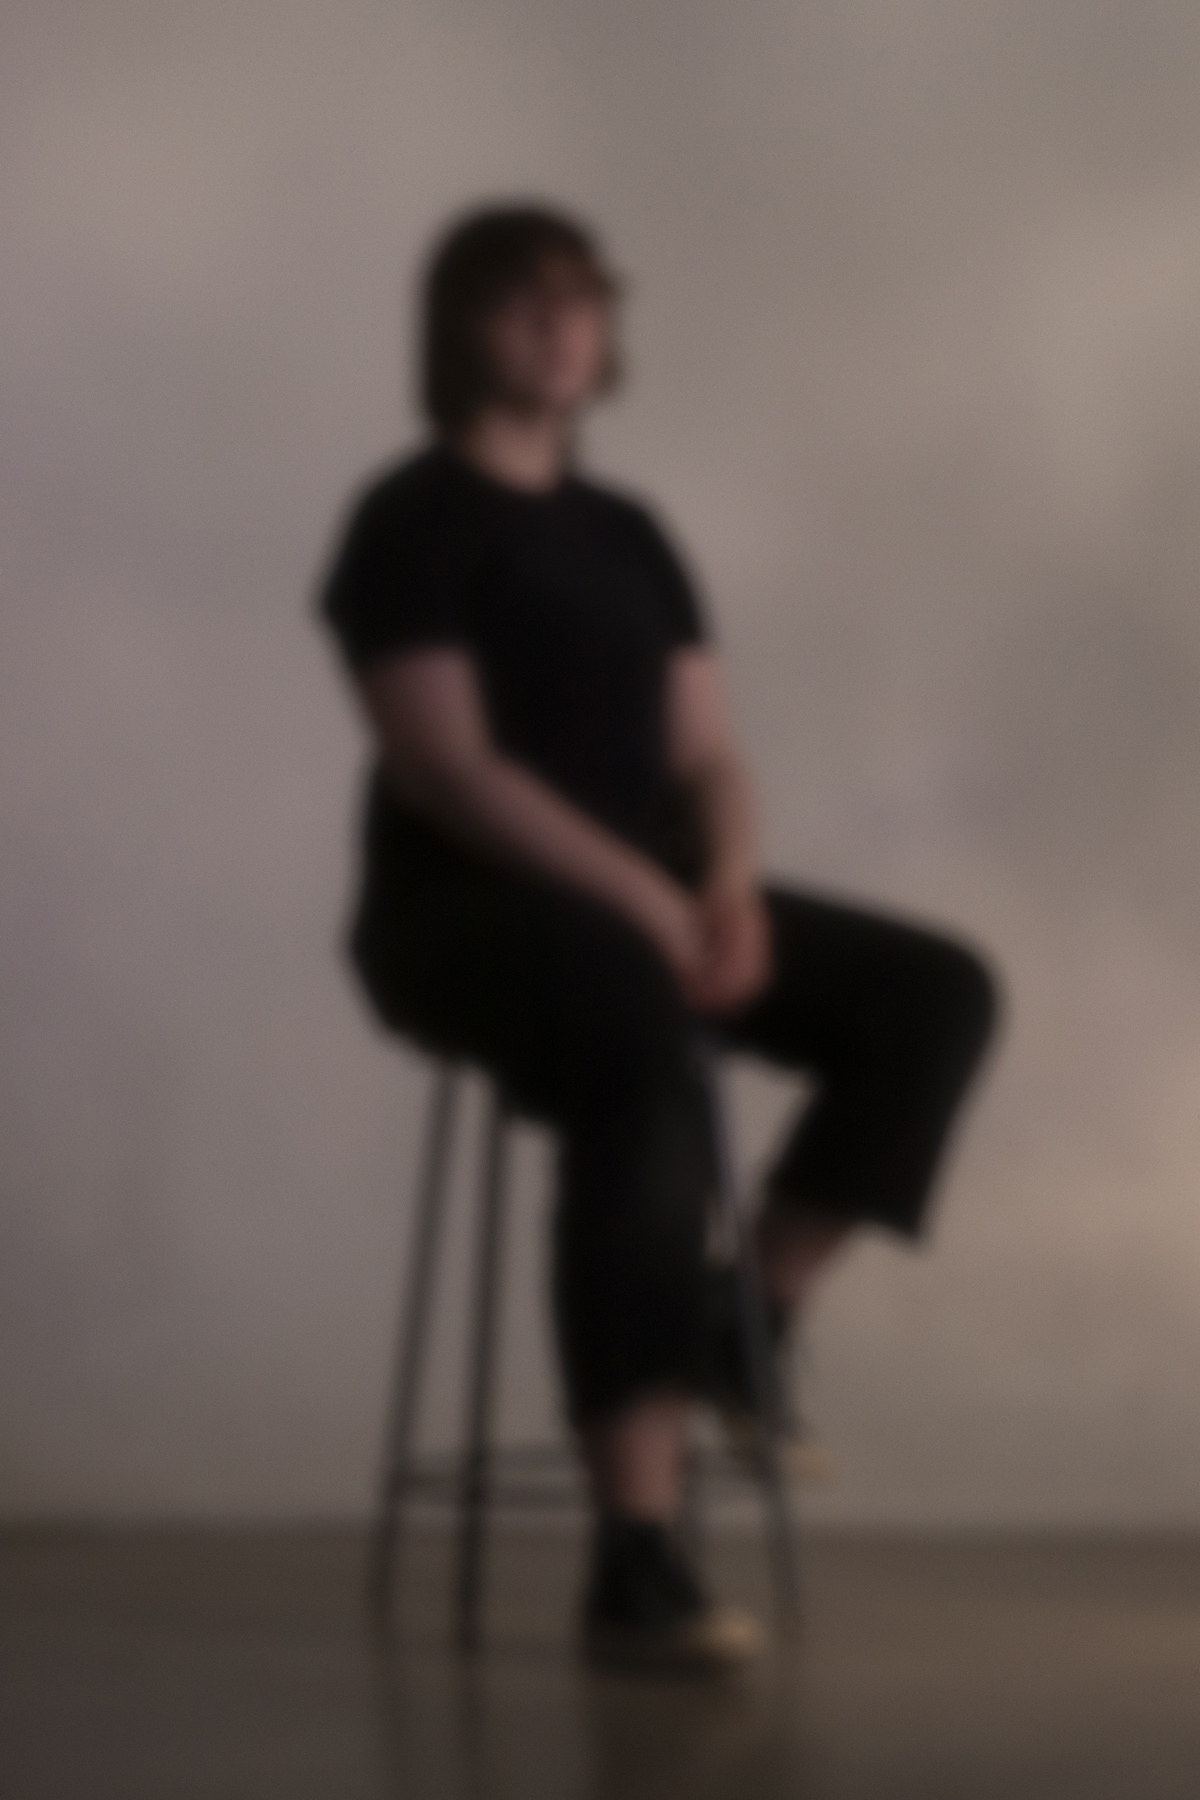 A person dressed in all black sits on a stool with their hands in their lap. The image is out of focus.